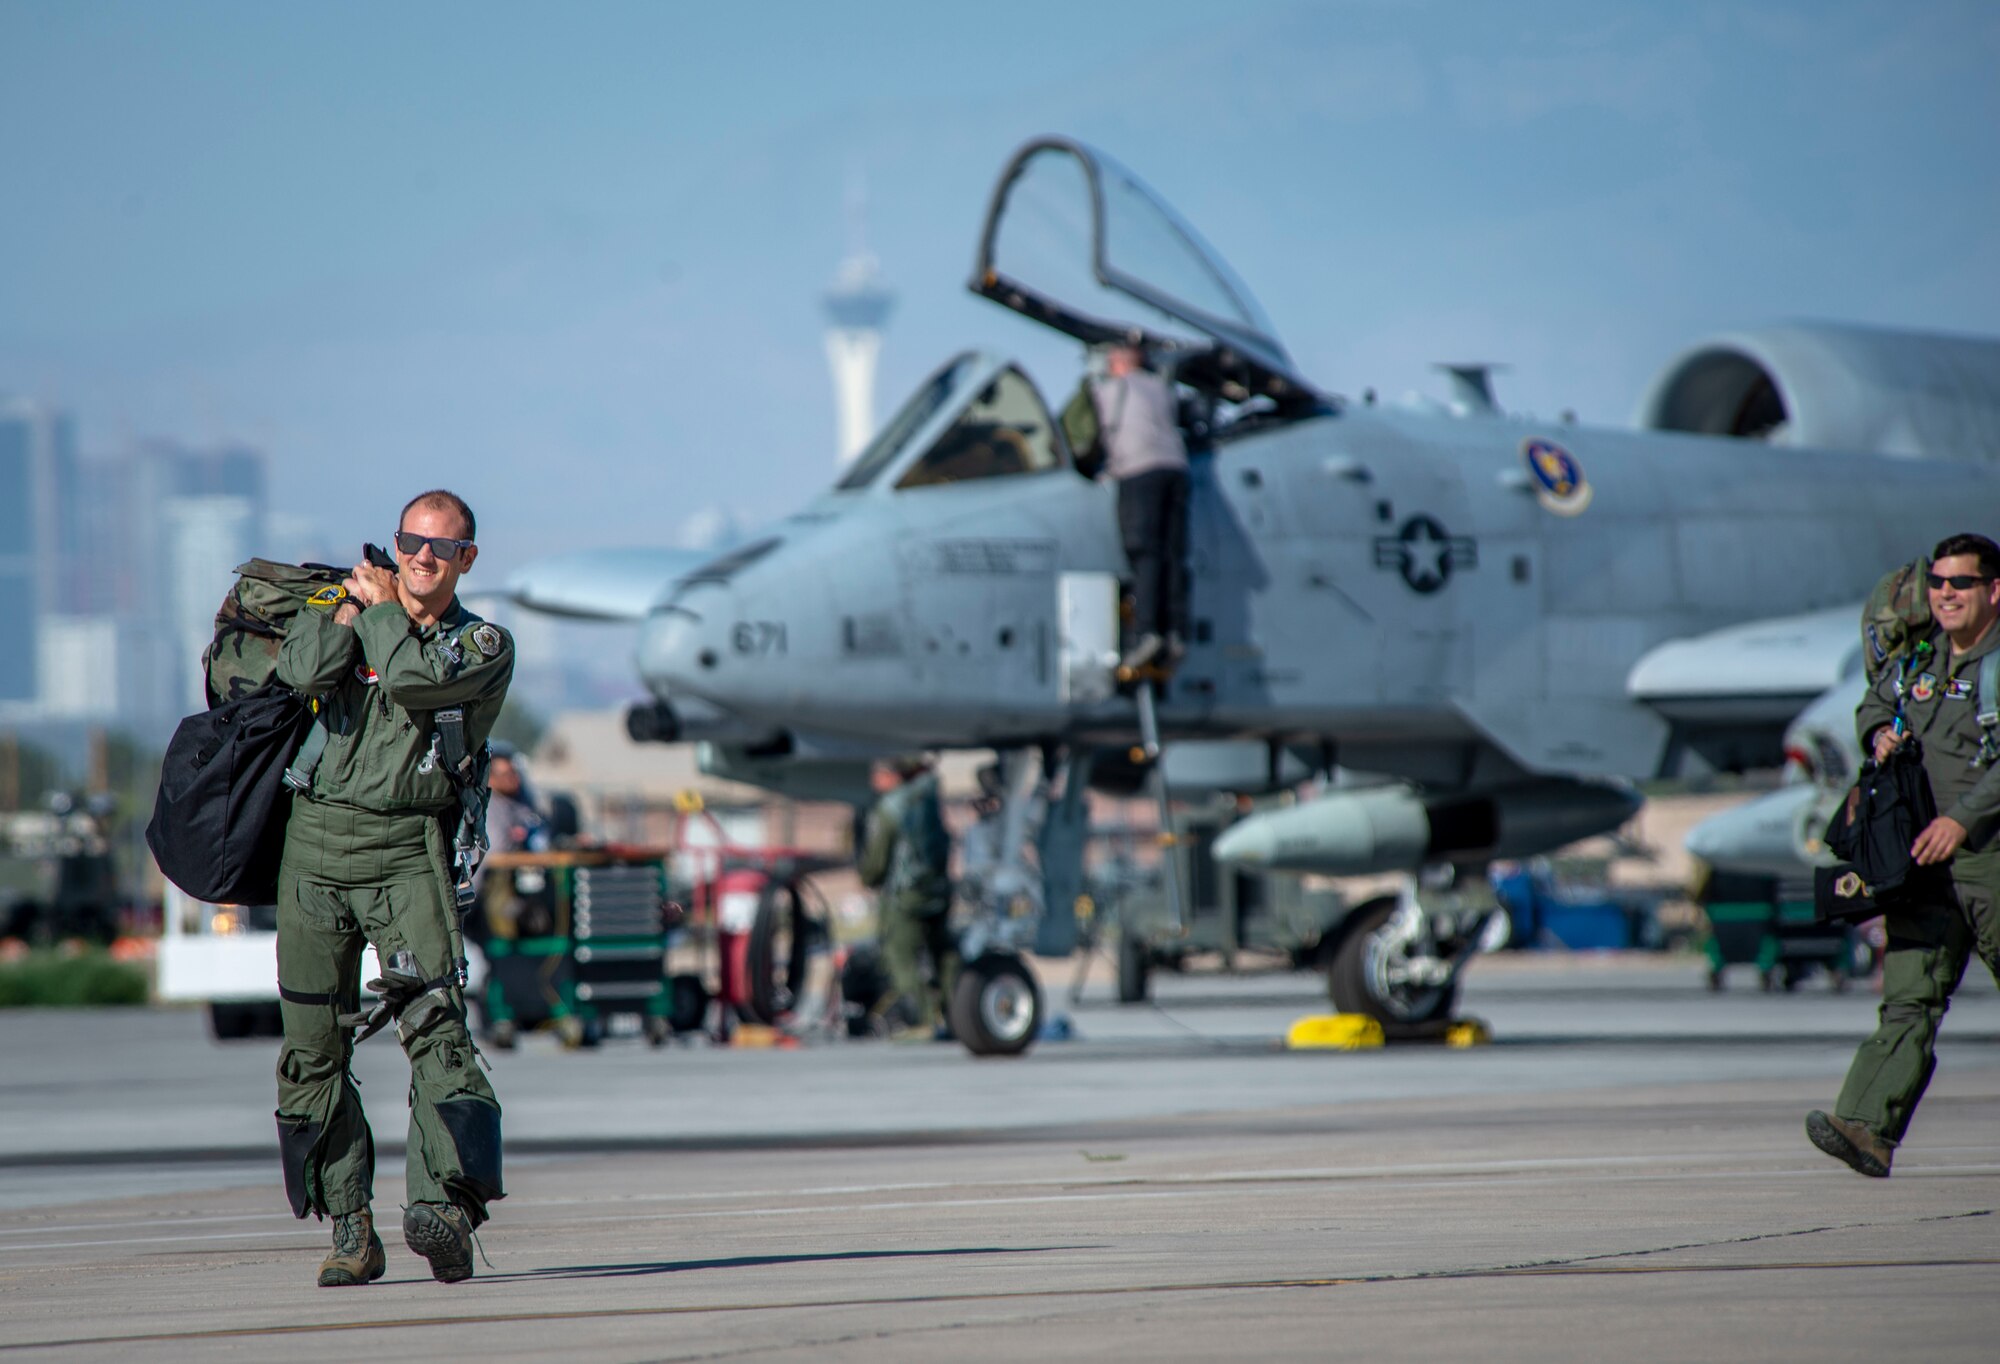 U.S. Air Force Lt. Col. James Kappes, 6th Combat Training Squadron (CTS) director of operations, and Capt. Eric Calvey, 6th CTS flight commander, walk out to their A-10 Thunderbolt II’s for a memorial flyover, Nellis Air Force Base, Nev., June 21, 2019. The memorial flyover honored 2nd Lt. James Lord, former P-47 Thunderbolt pilot, who was missing in action from Aug. 10, 1944 to summer of 2018. (U.S. Air Force photo by Staff Sgt. Tabatha McCarthy)